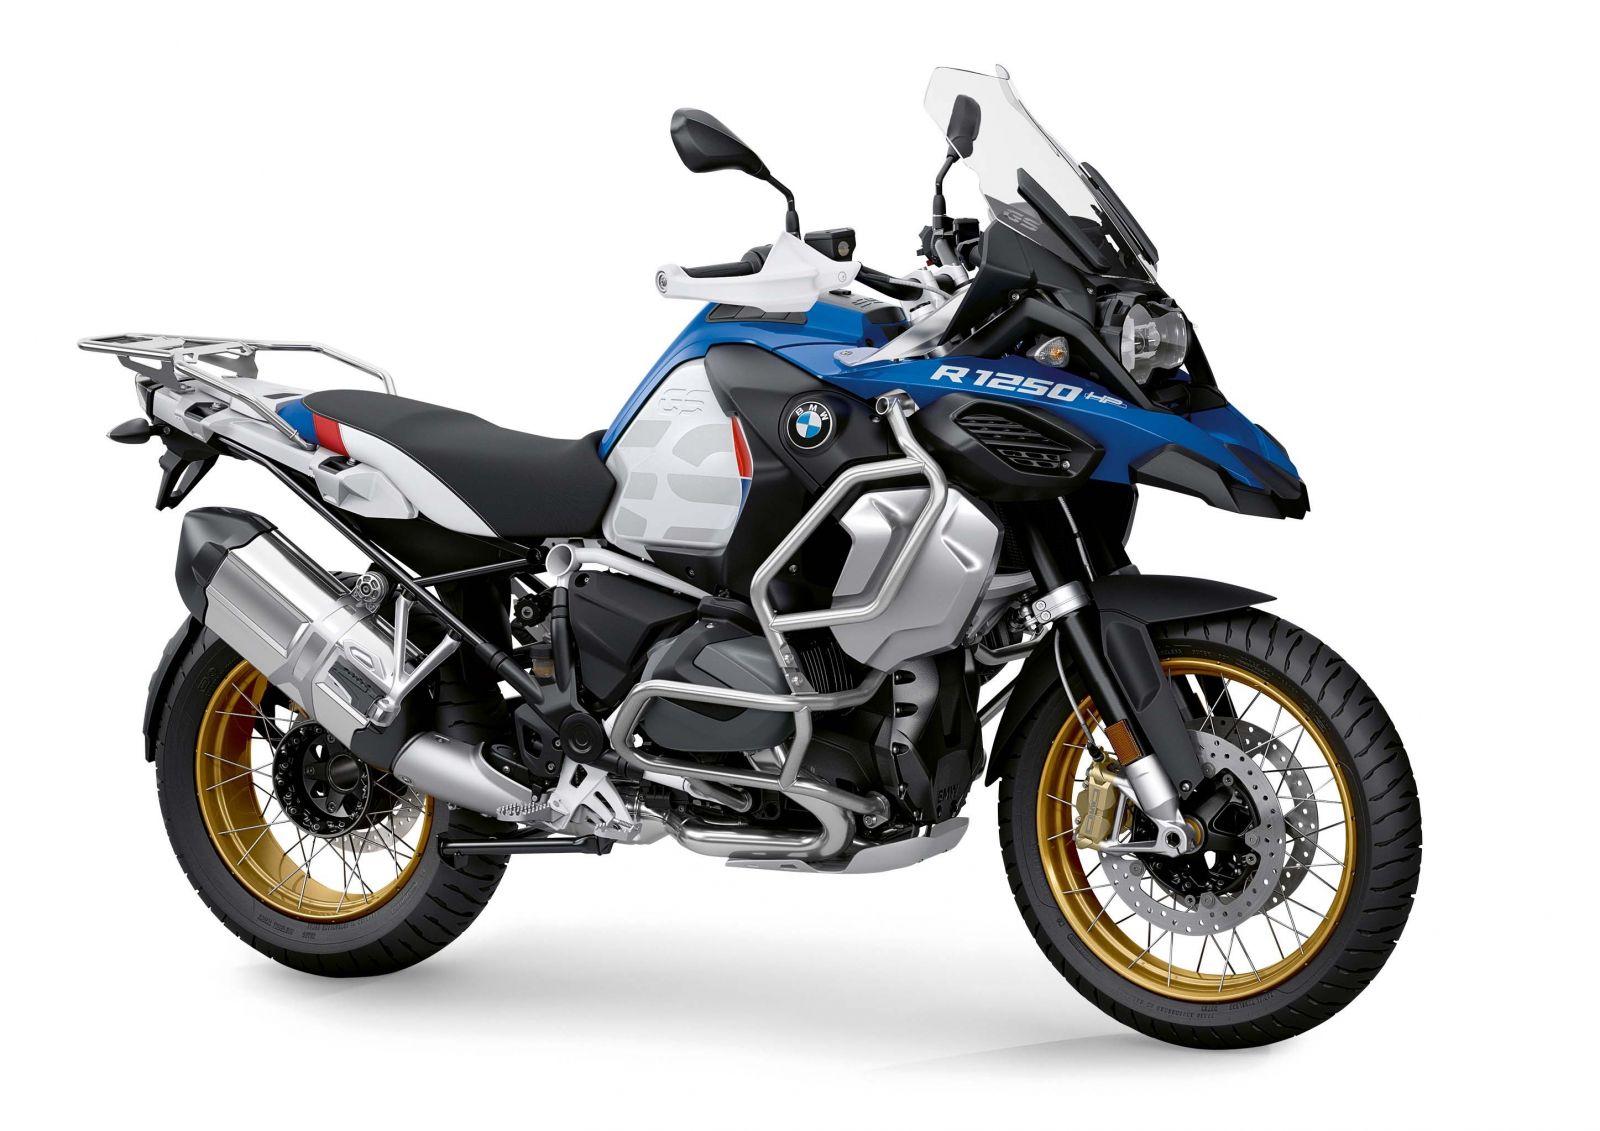 BMWs2019 R12500GS Adventure made better with Hepco Becker motocycle accessories.